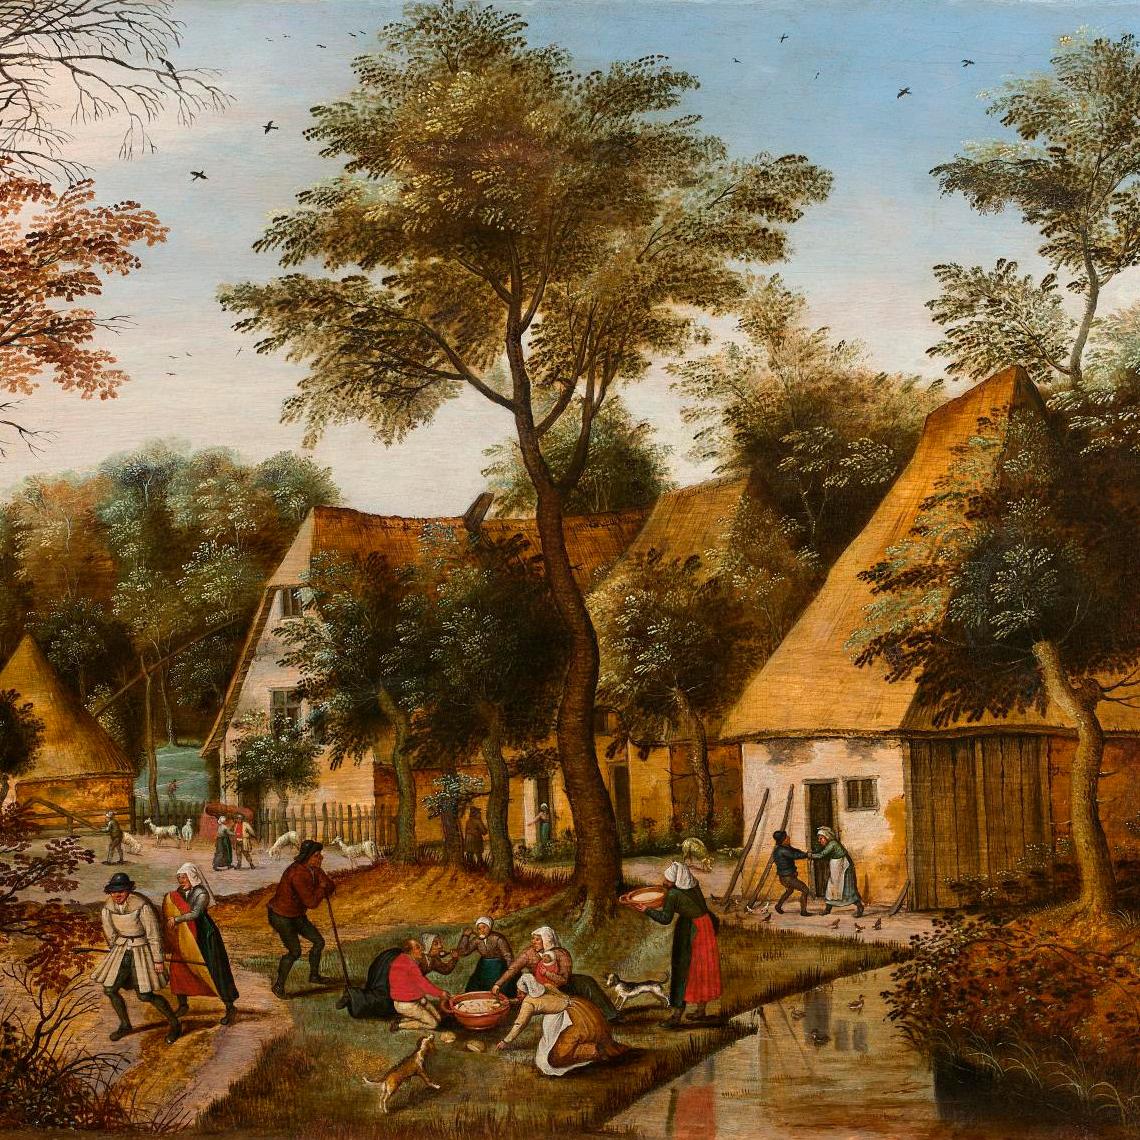 Bruegel the Younger’s "Peasants' Meal in the Village" - Pre-sale